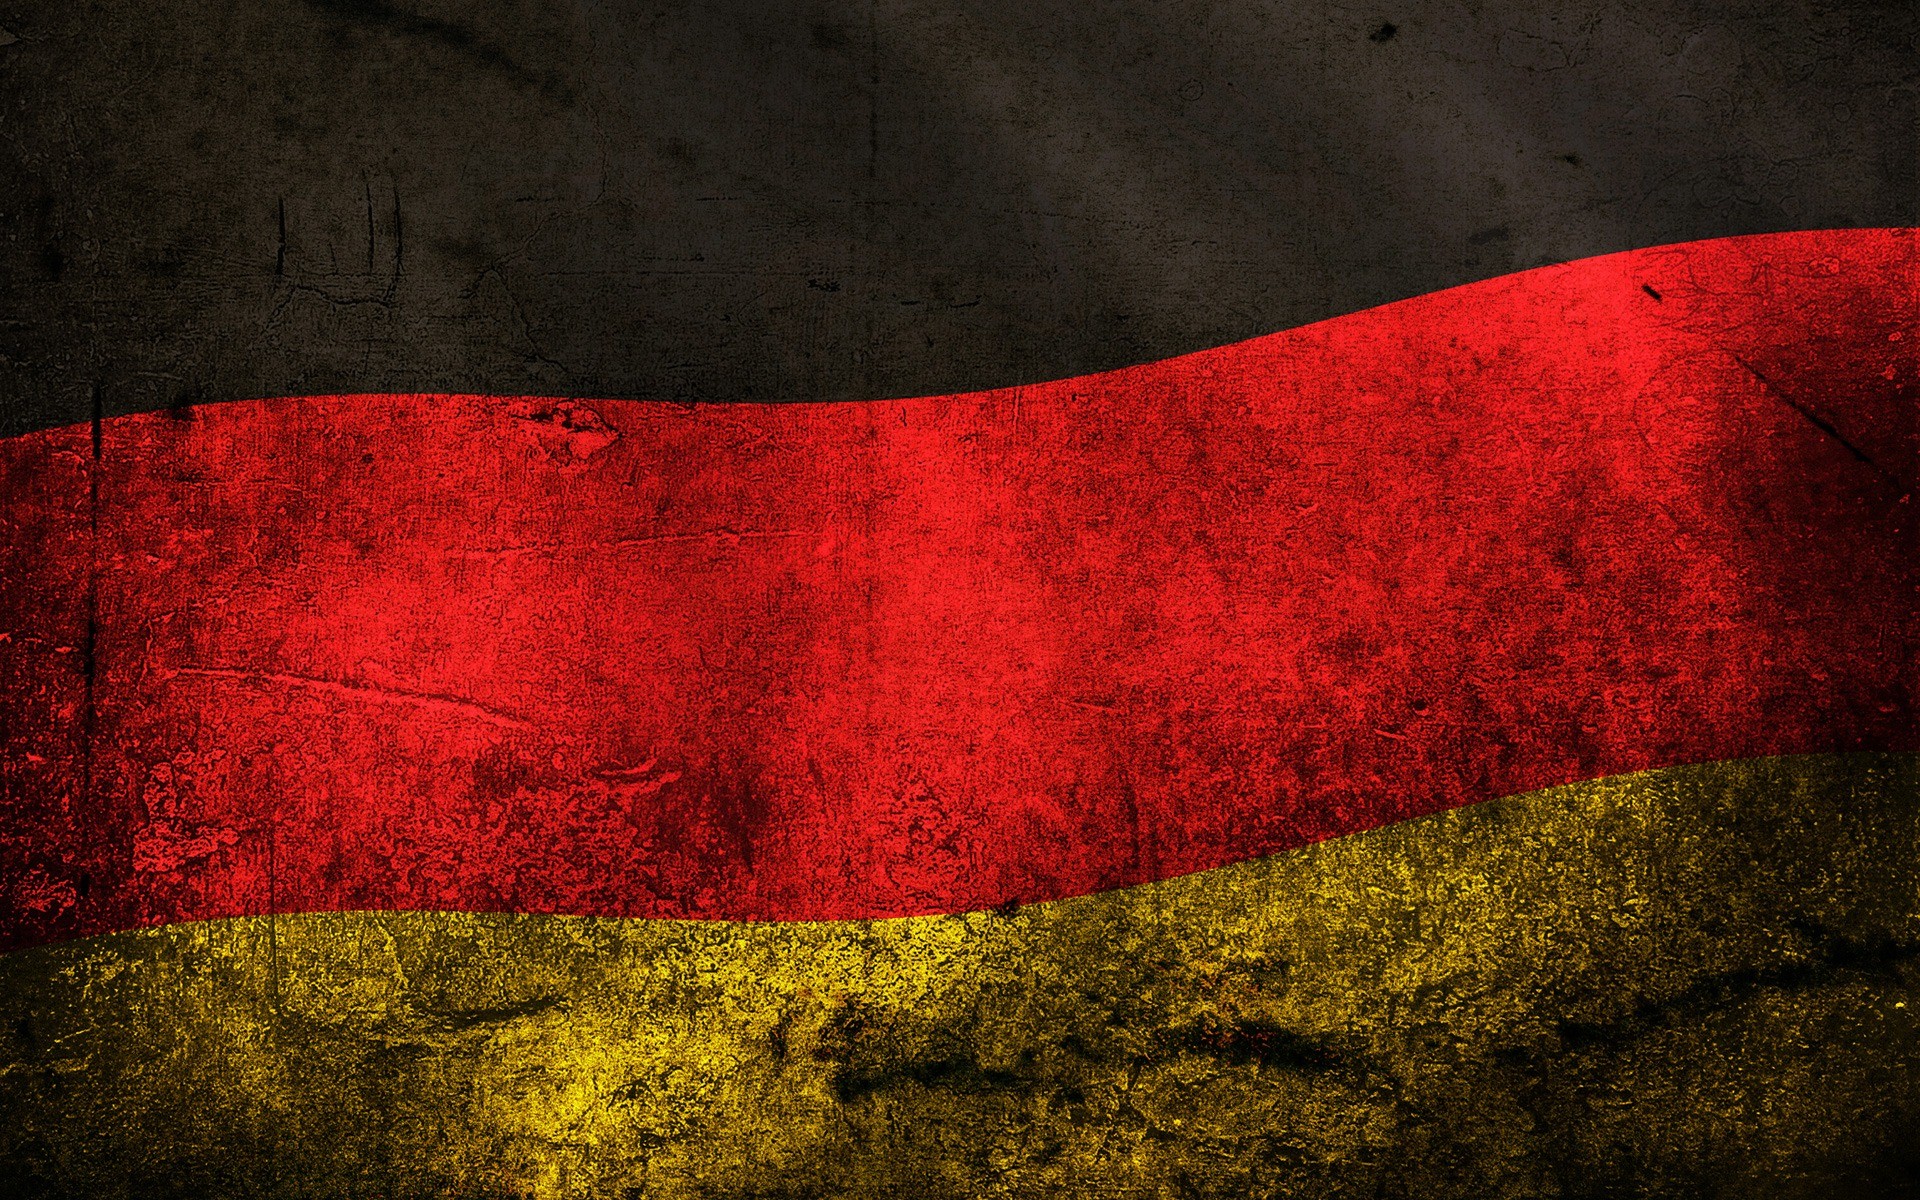 Download High Quality Germany Flag Images and Pictures - HD to 4K Quality -  Pixabay